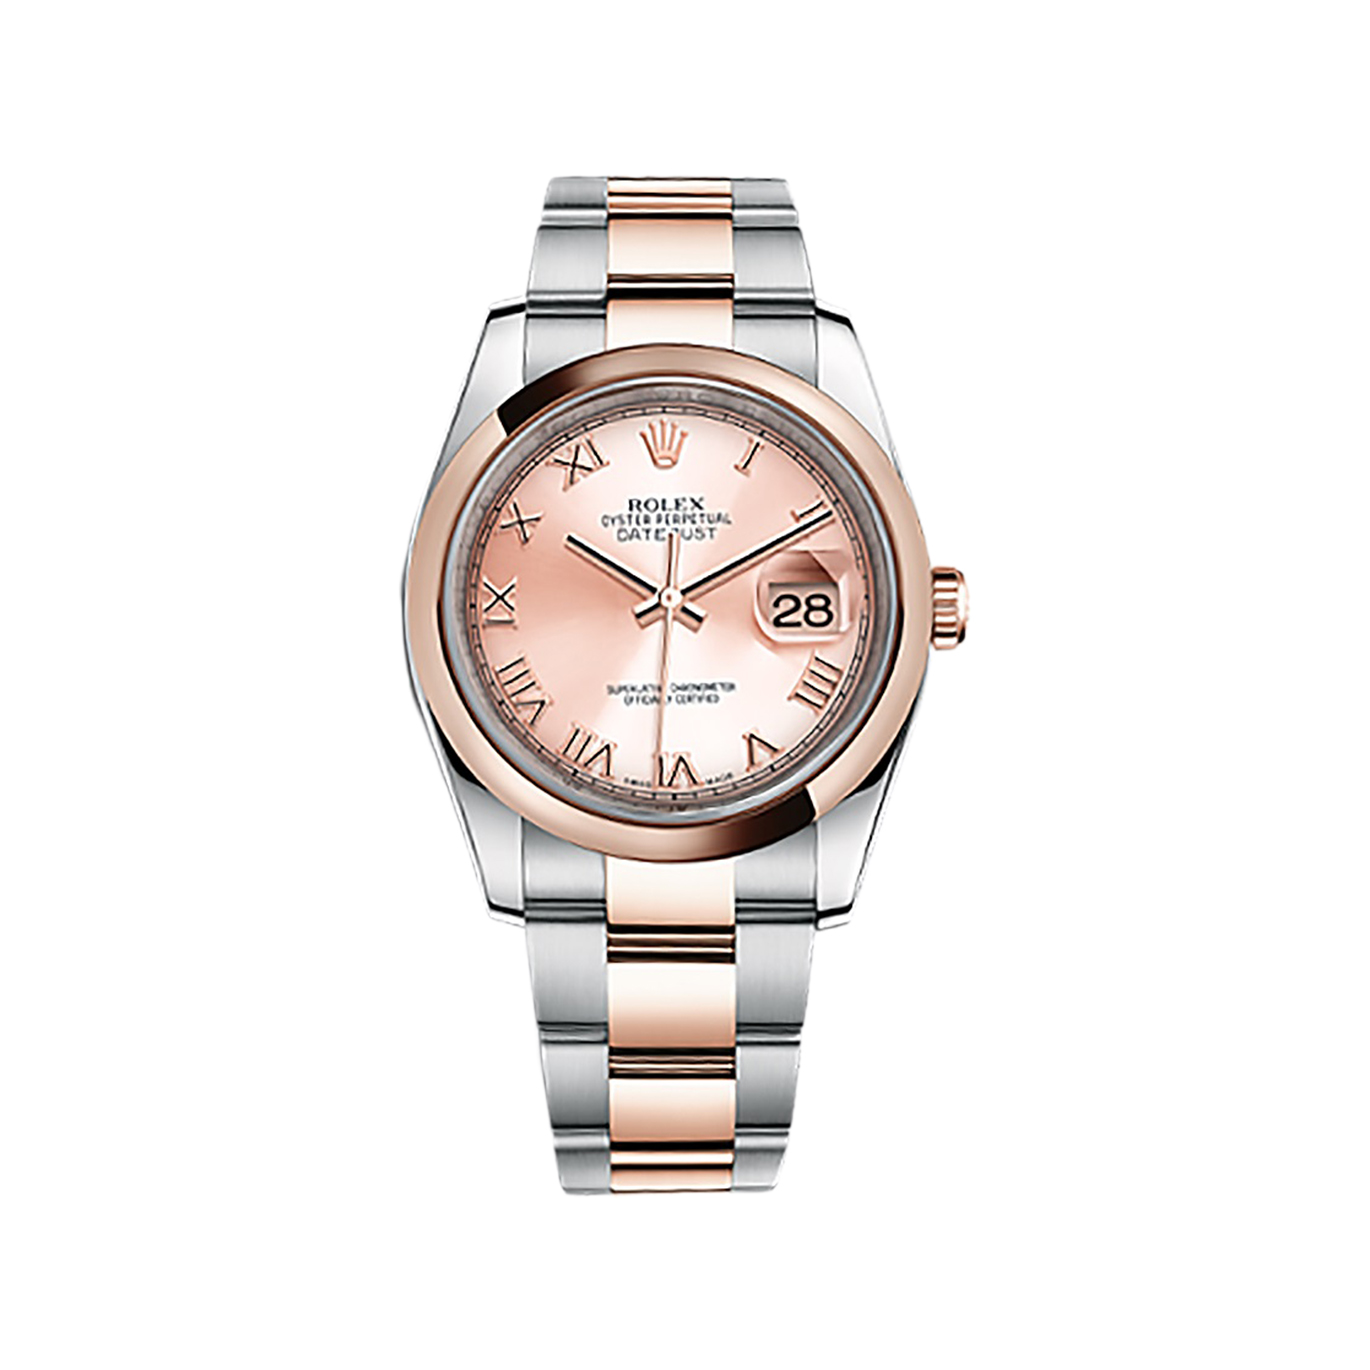 Datejust 36 116201 Rose Gold & Stainless Steel Watch (Pink)